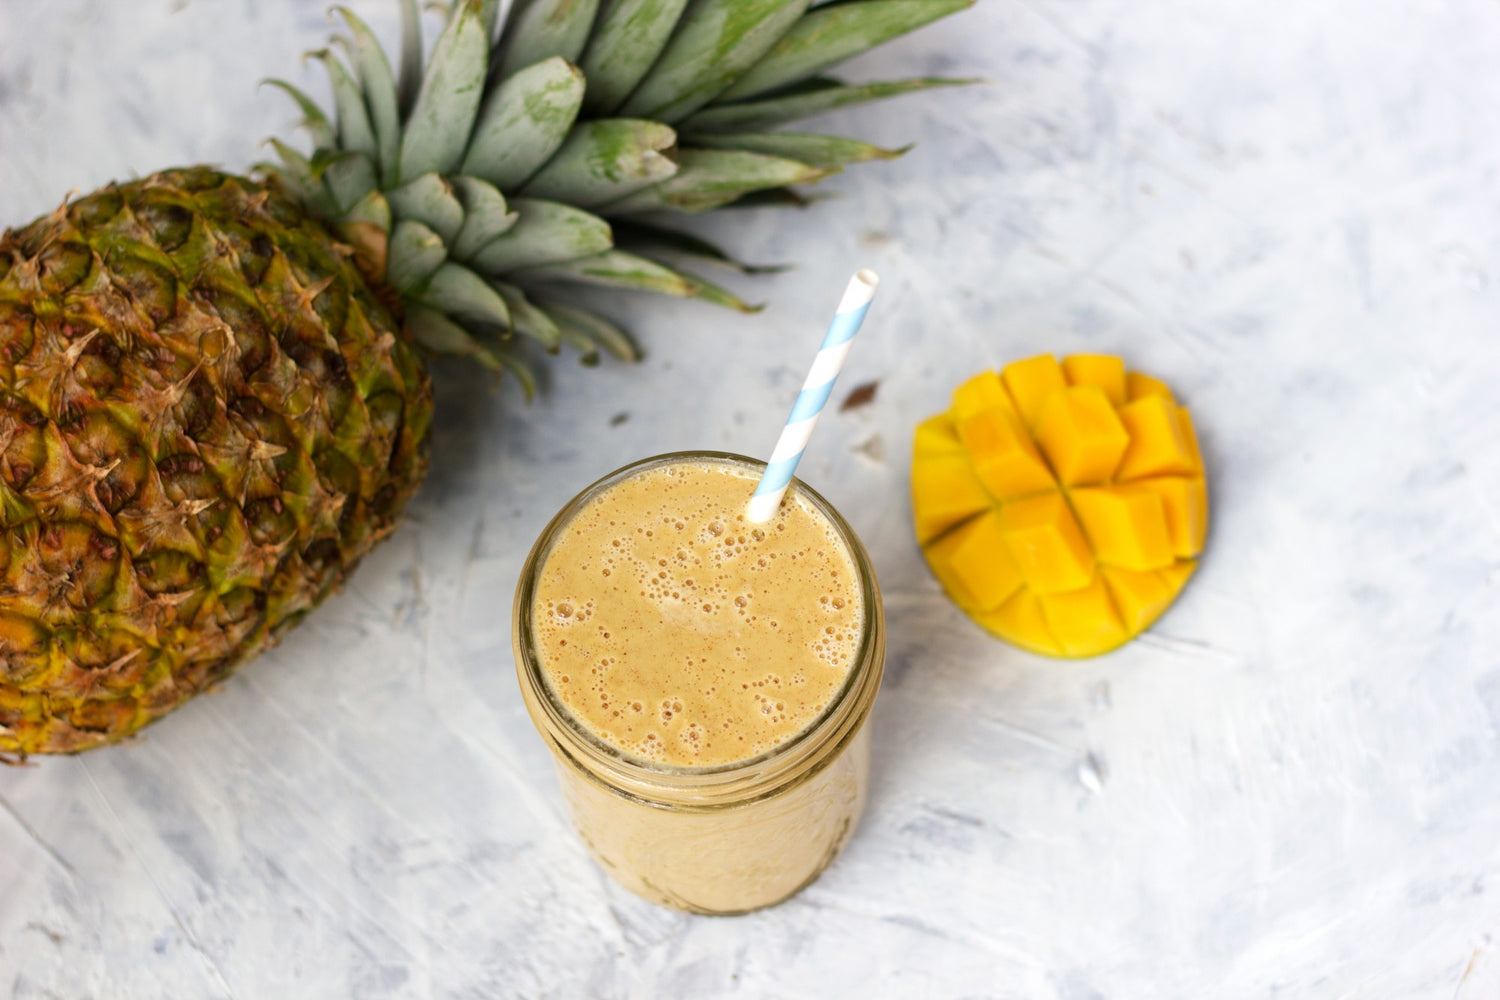 This Secret Ingredient Is Going To Transform Your Smoothie